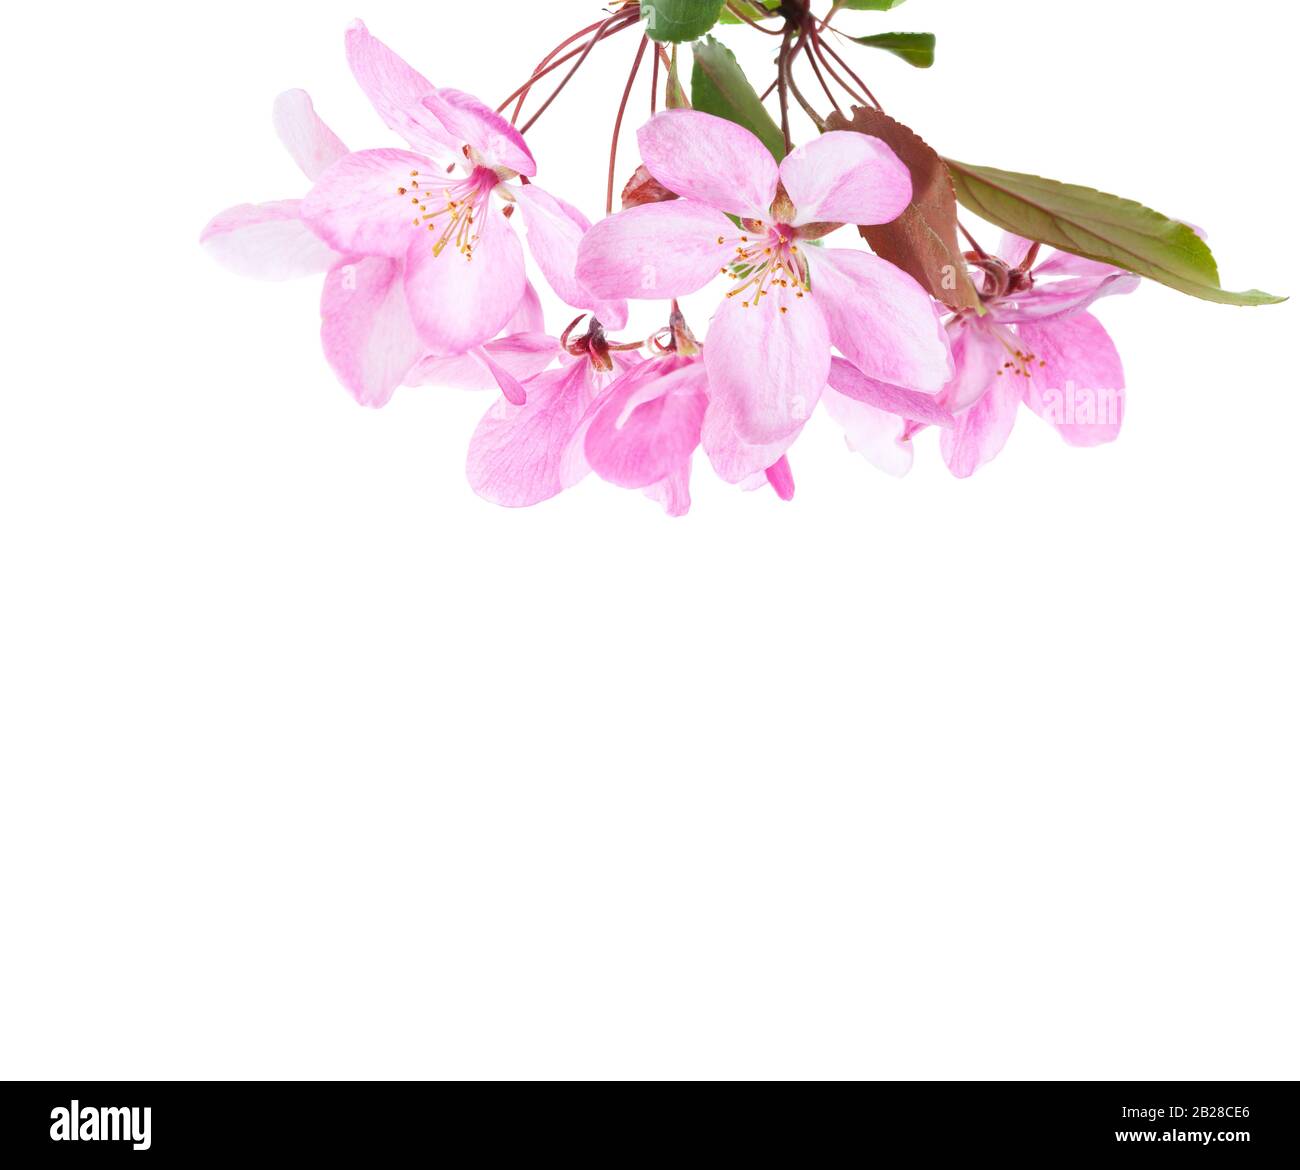 Branch with light pink flowers of decorative Apple tree (Japanese flowering crabapple) isolated on white background. Stock Photo